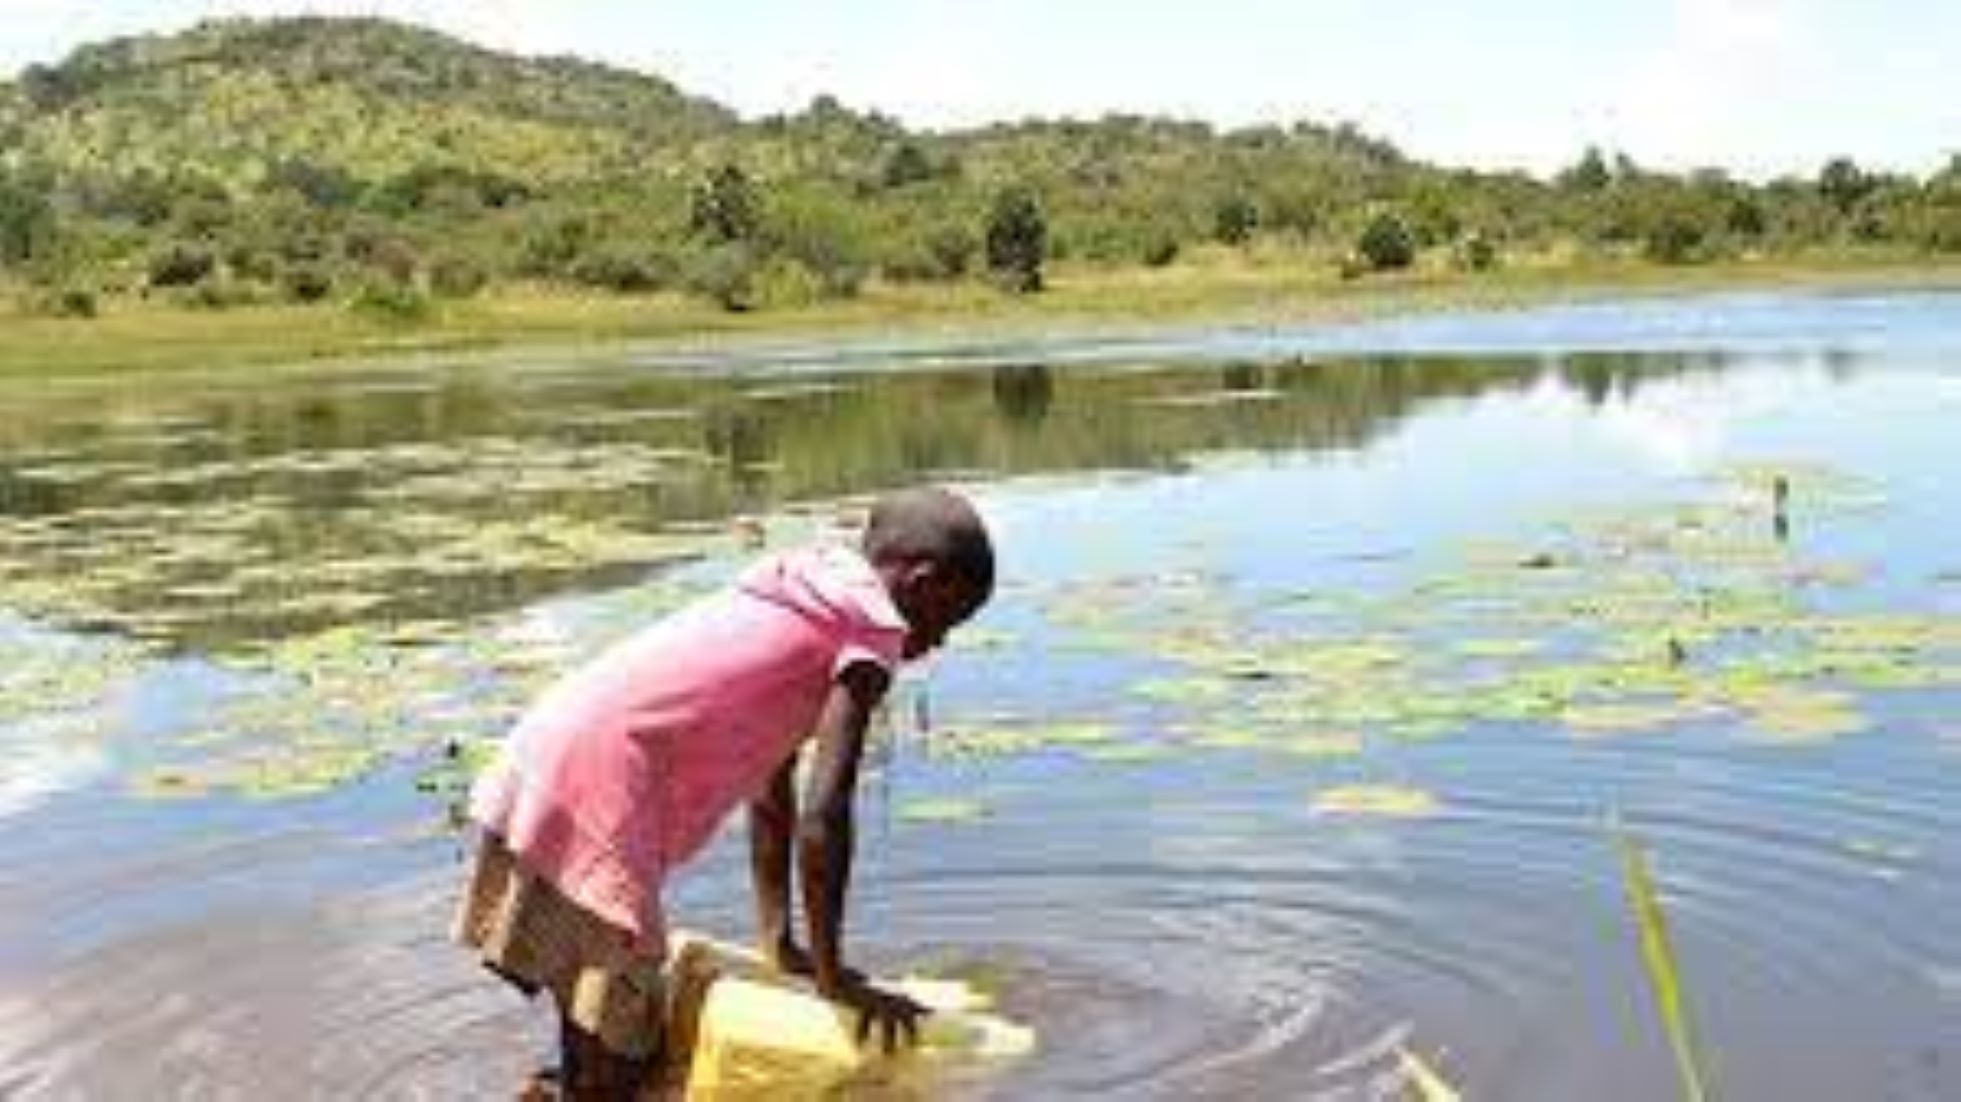 Uganda Publishes Wetlands List To Conserve Environment, Reducing Effects Of Climate Change